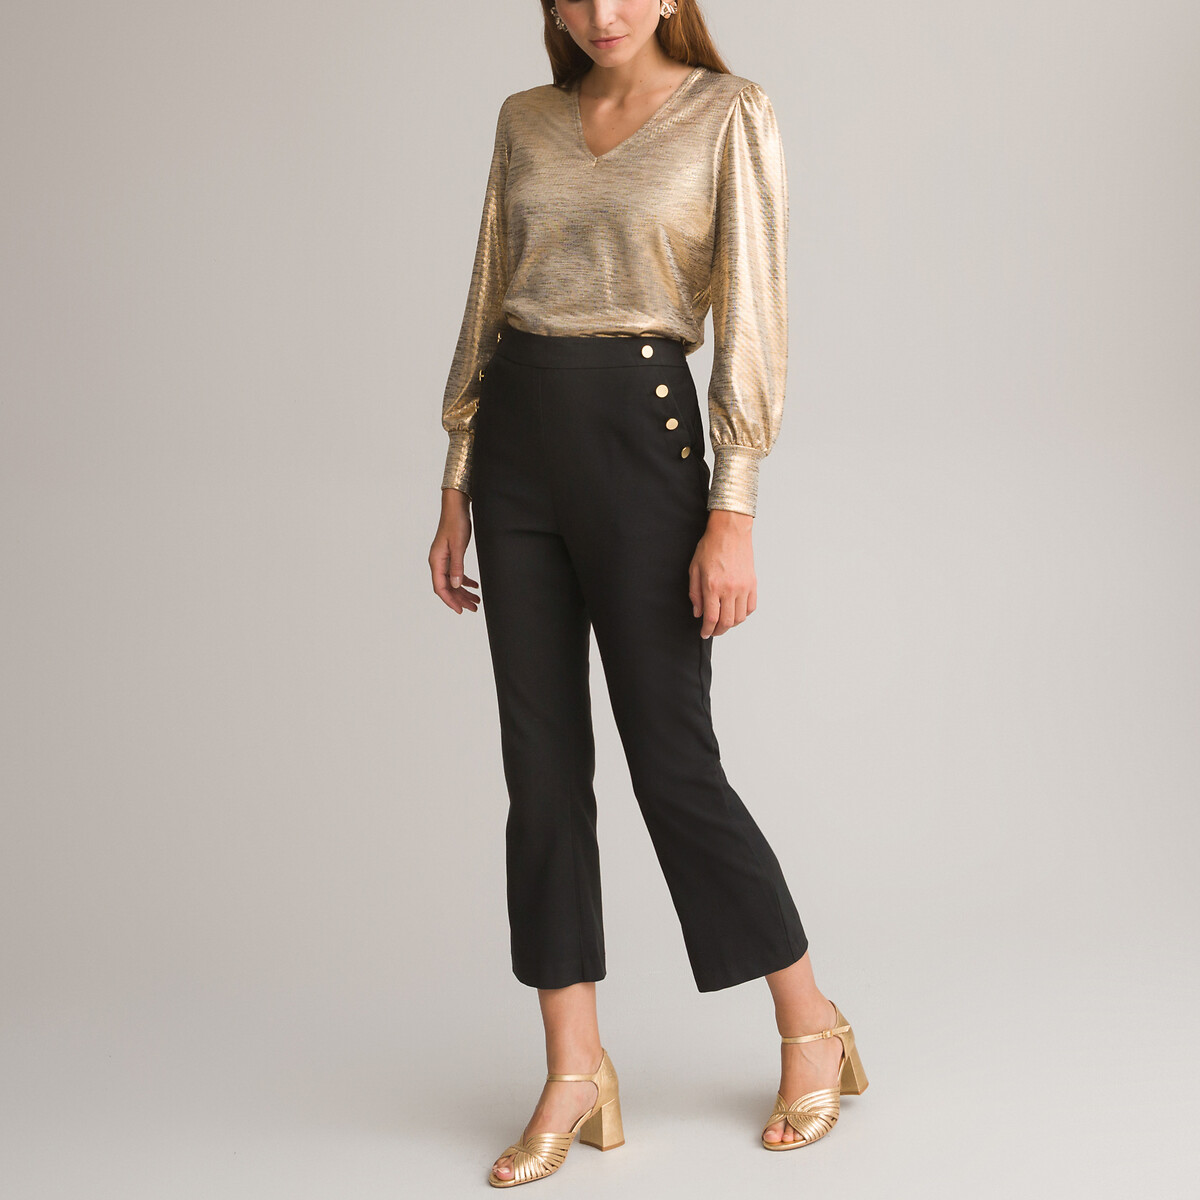 Image of Recycled Cropped Flared Trousers, Length 25.5"